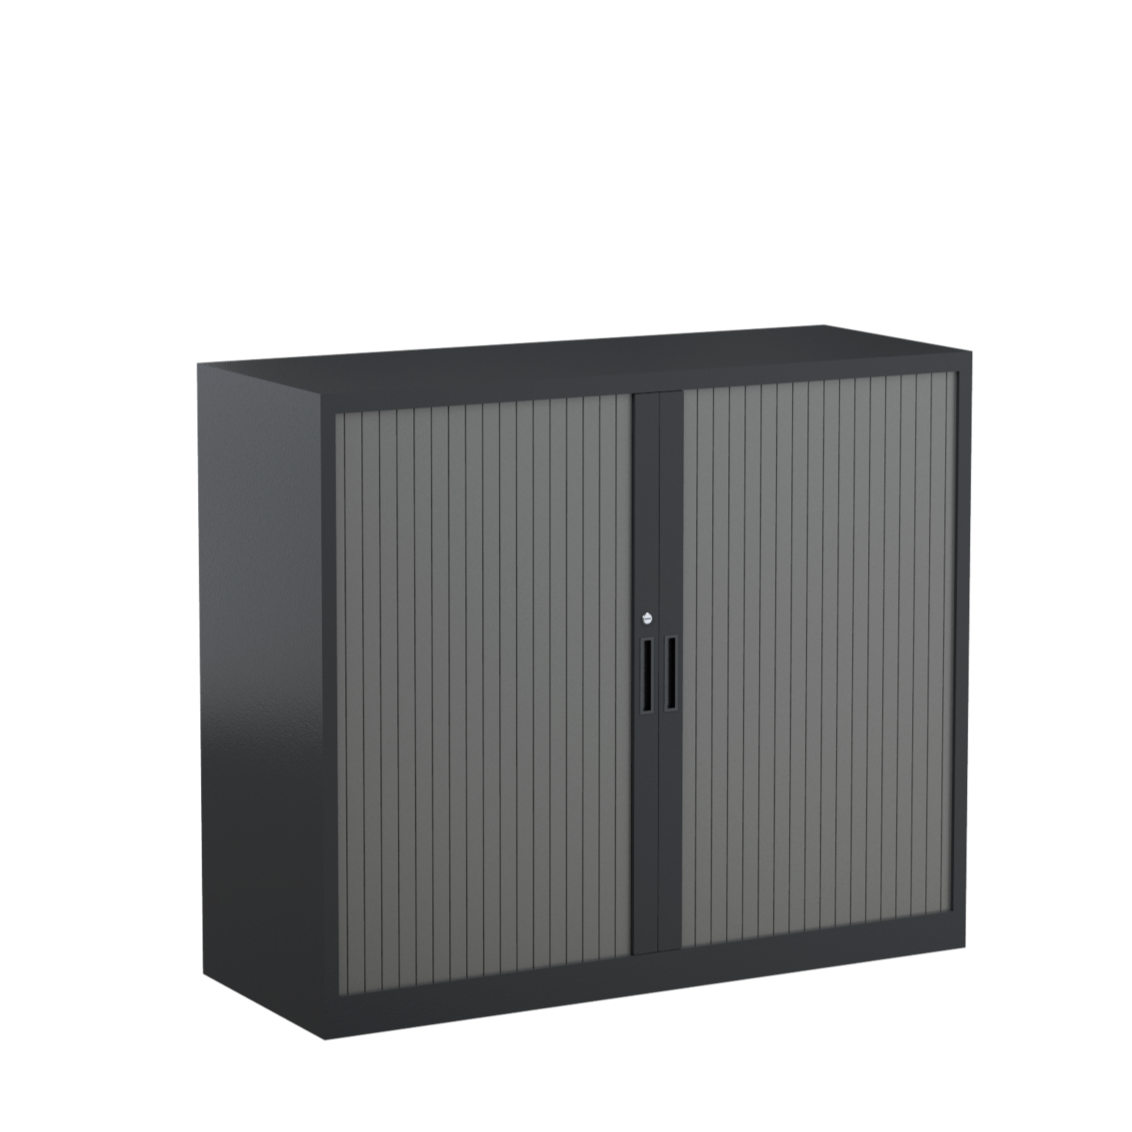 Steelco Small Tambour Cabinet 1015mm